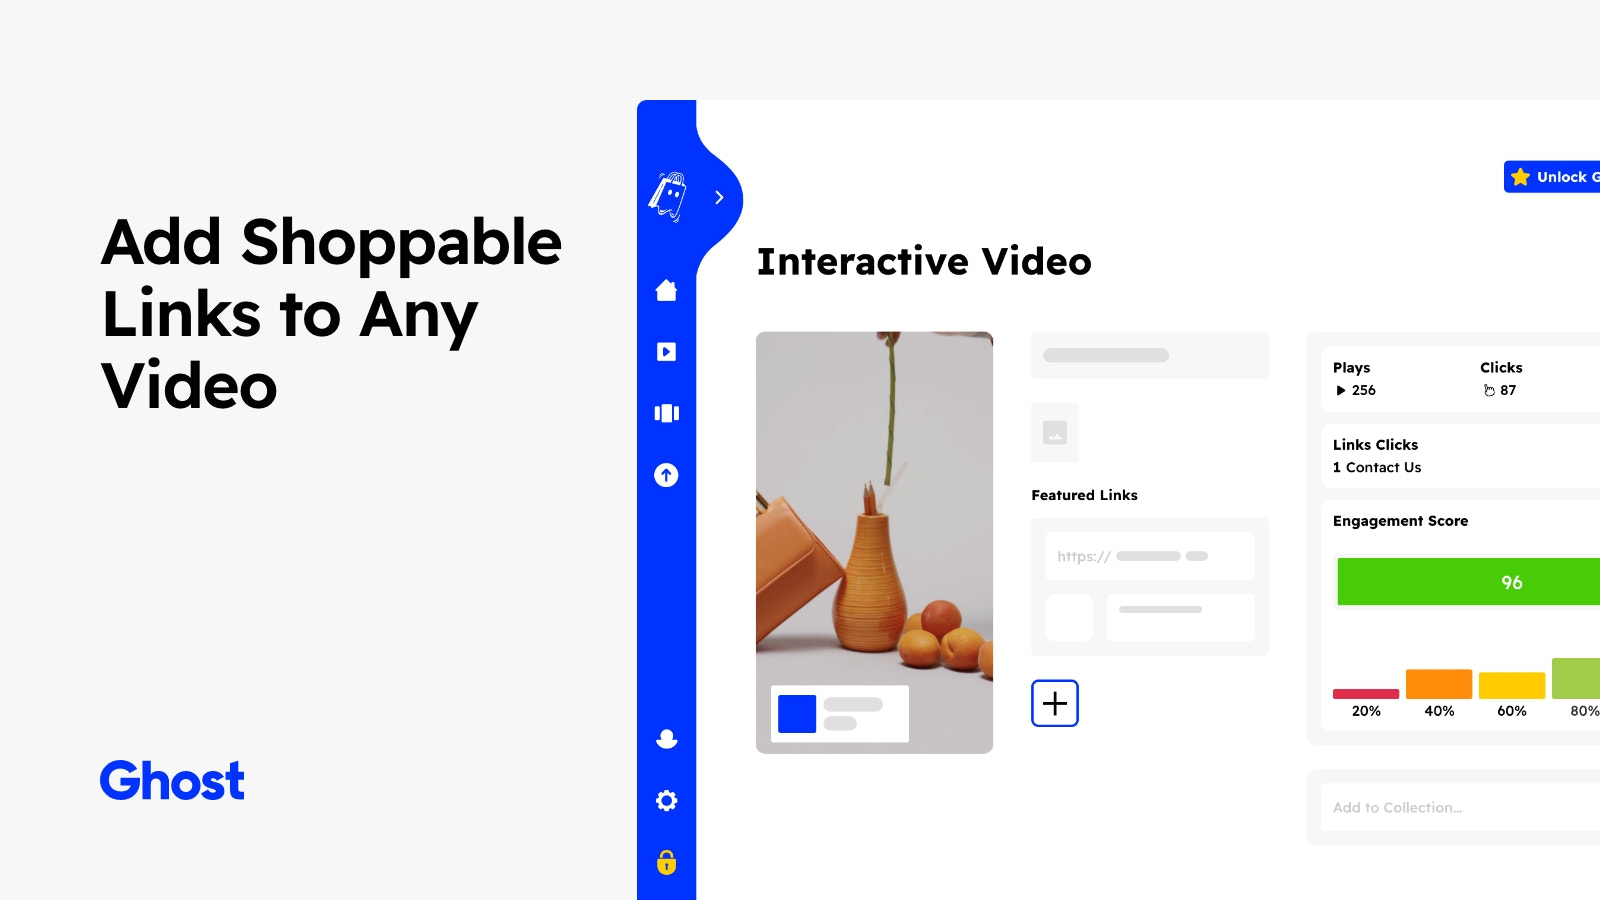 Add Shoppable Links to Any Video